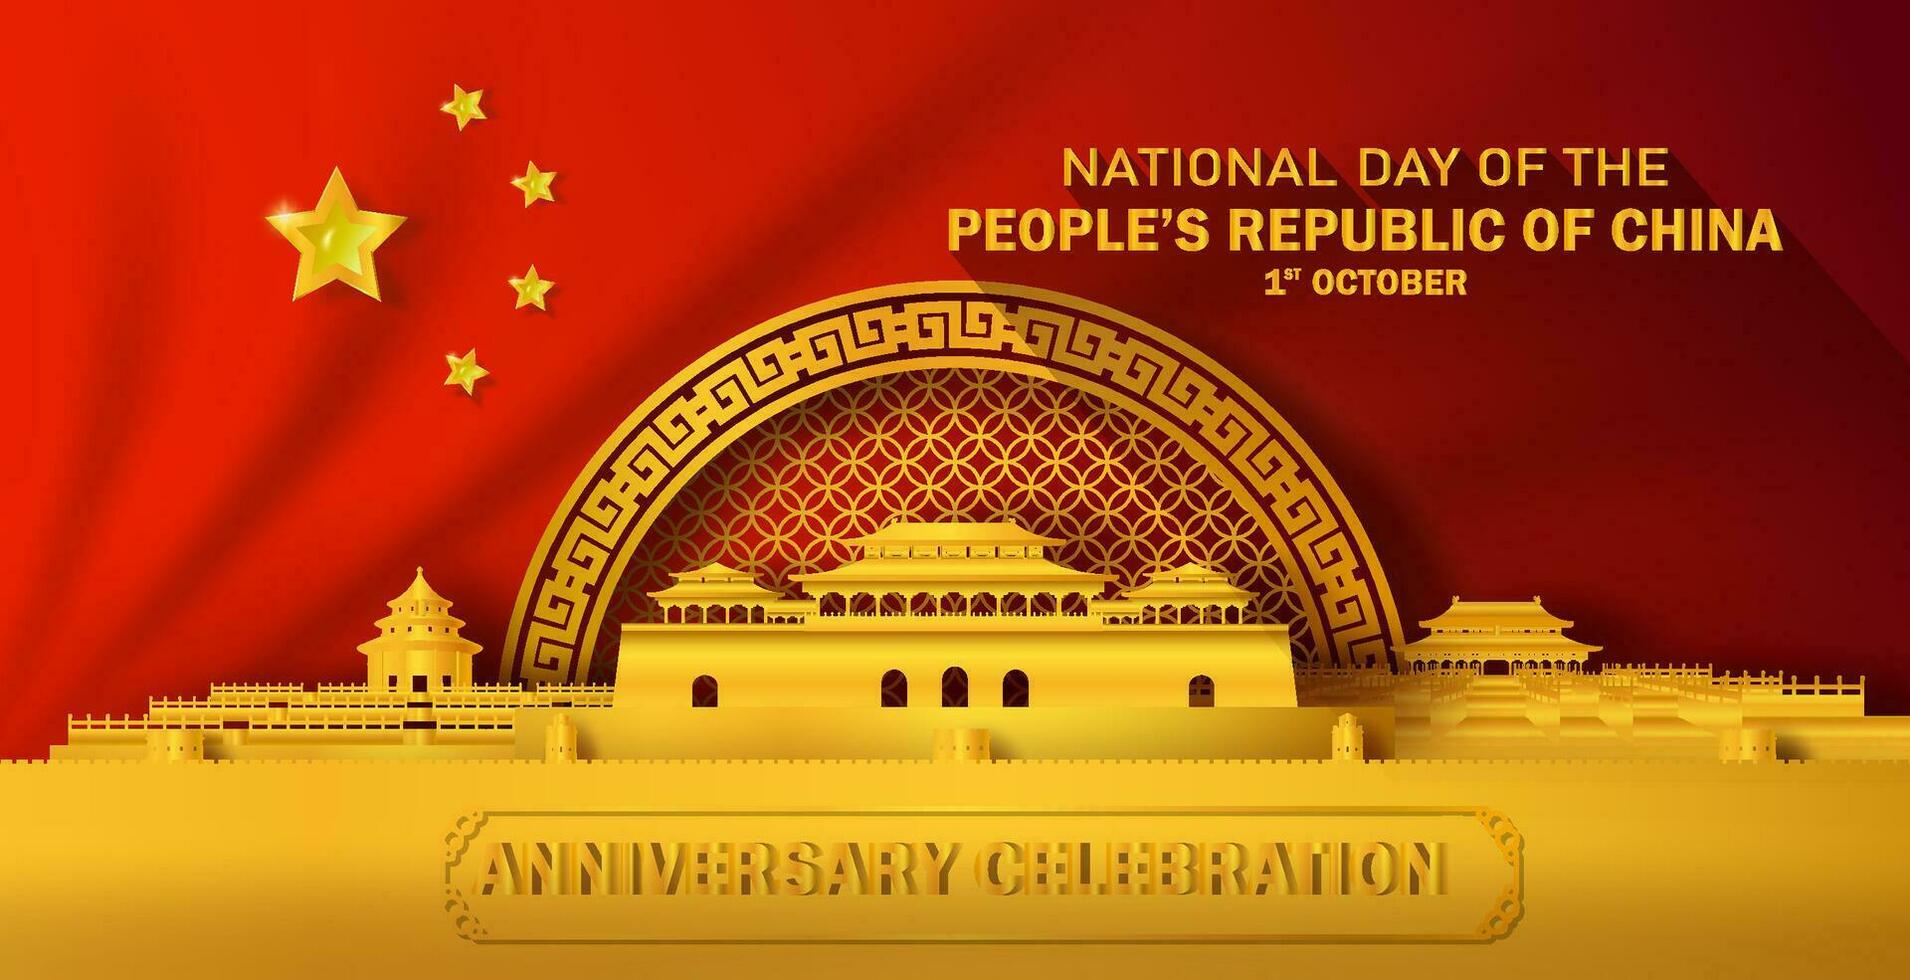 Travel china with national day people's republic of China. vector